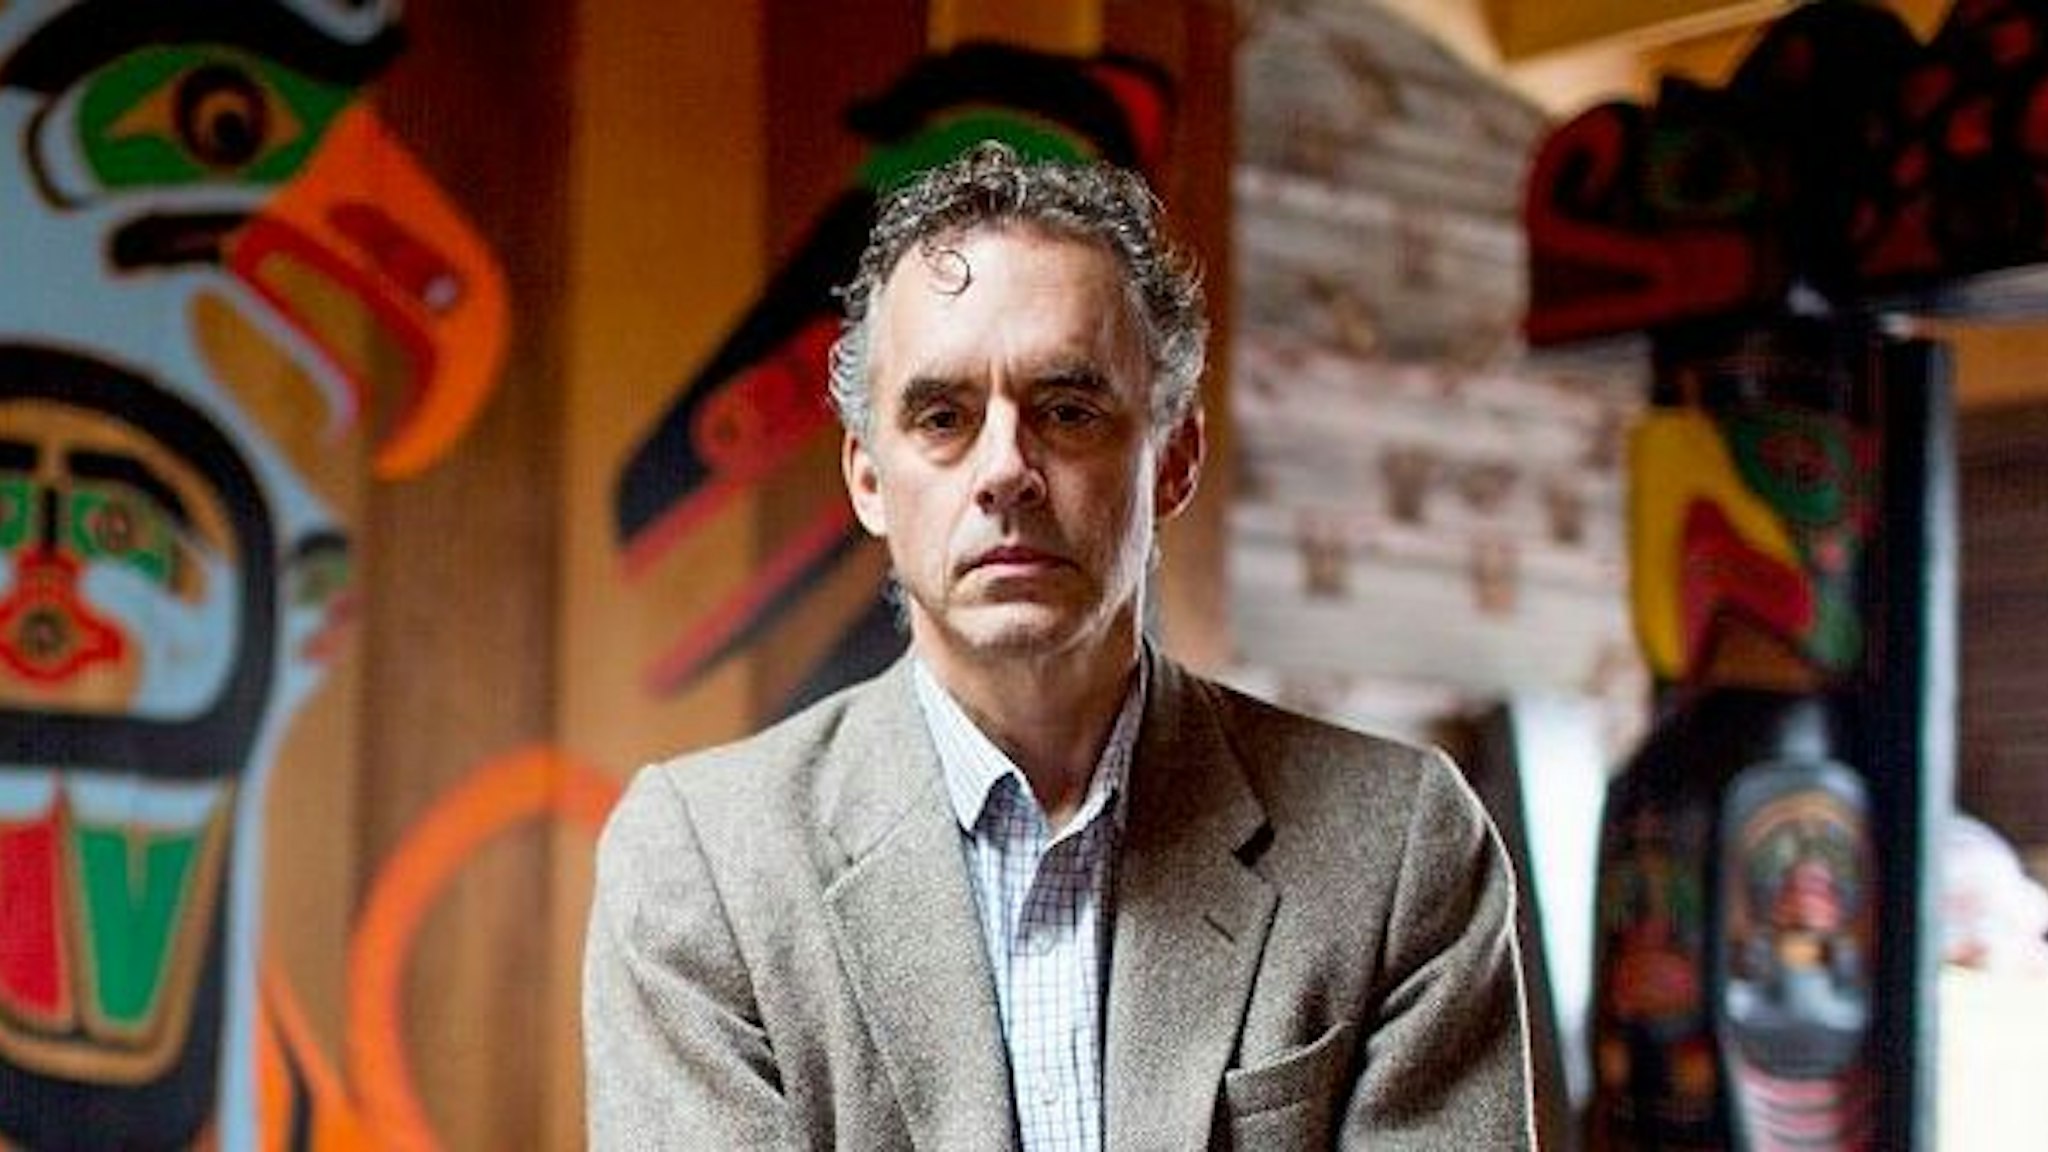 Profile of Dr. Jordan Peterson. The U of T prof at the centre of a media storm because of his public declaration that he will not use pronouns, such as "they," to recognize non-binary genders. (Carlos Osorio/Toronto Star via Getty Images)